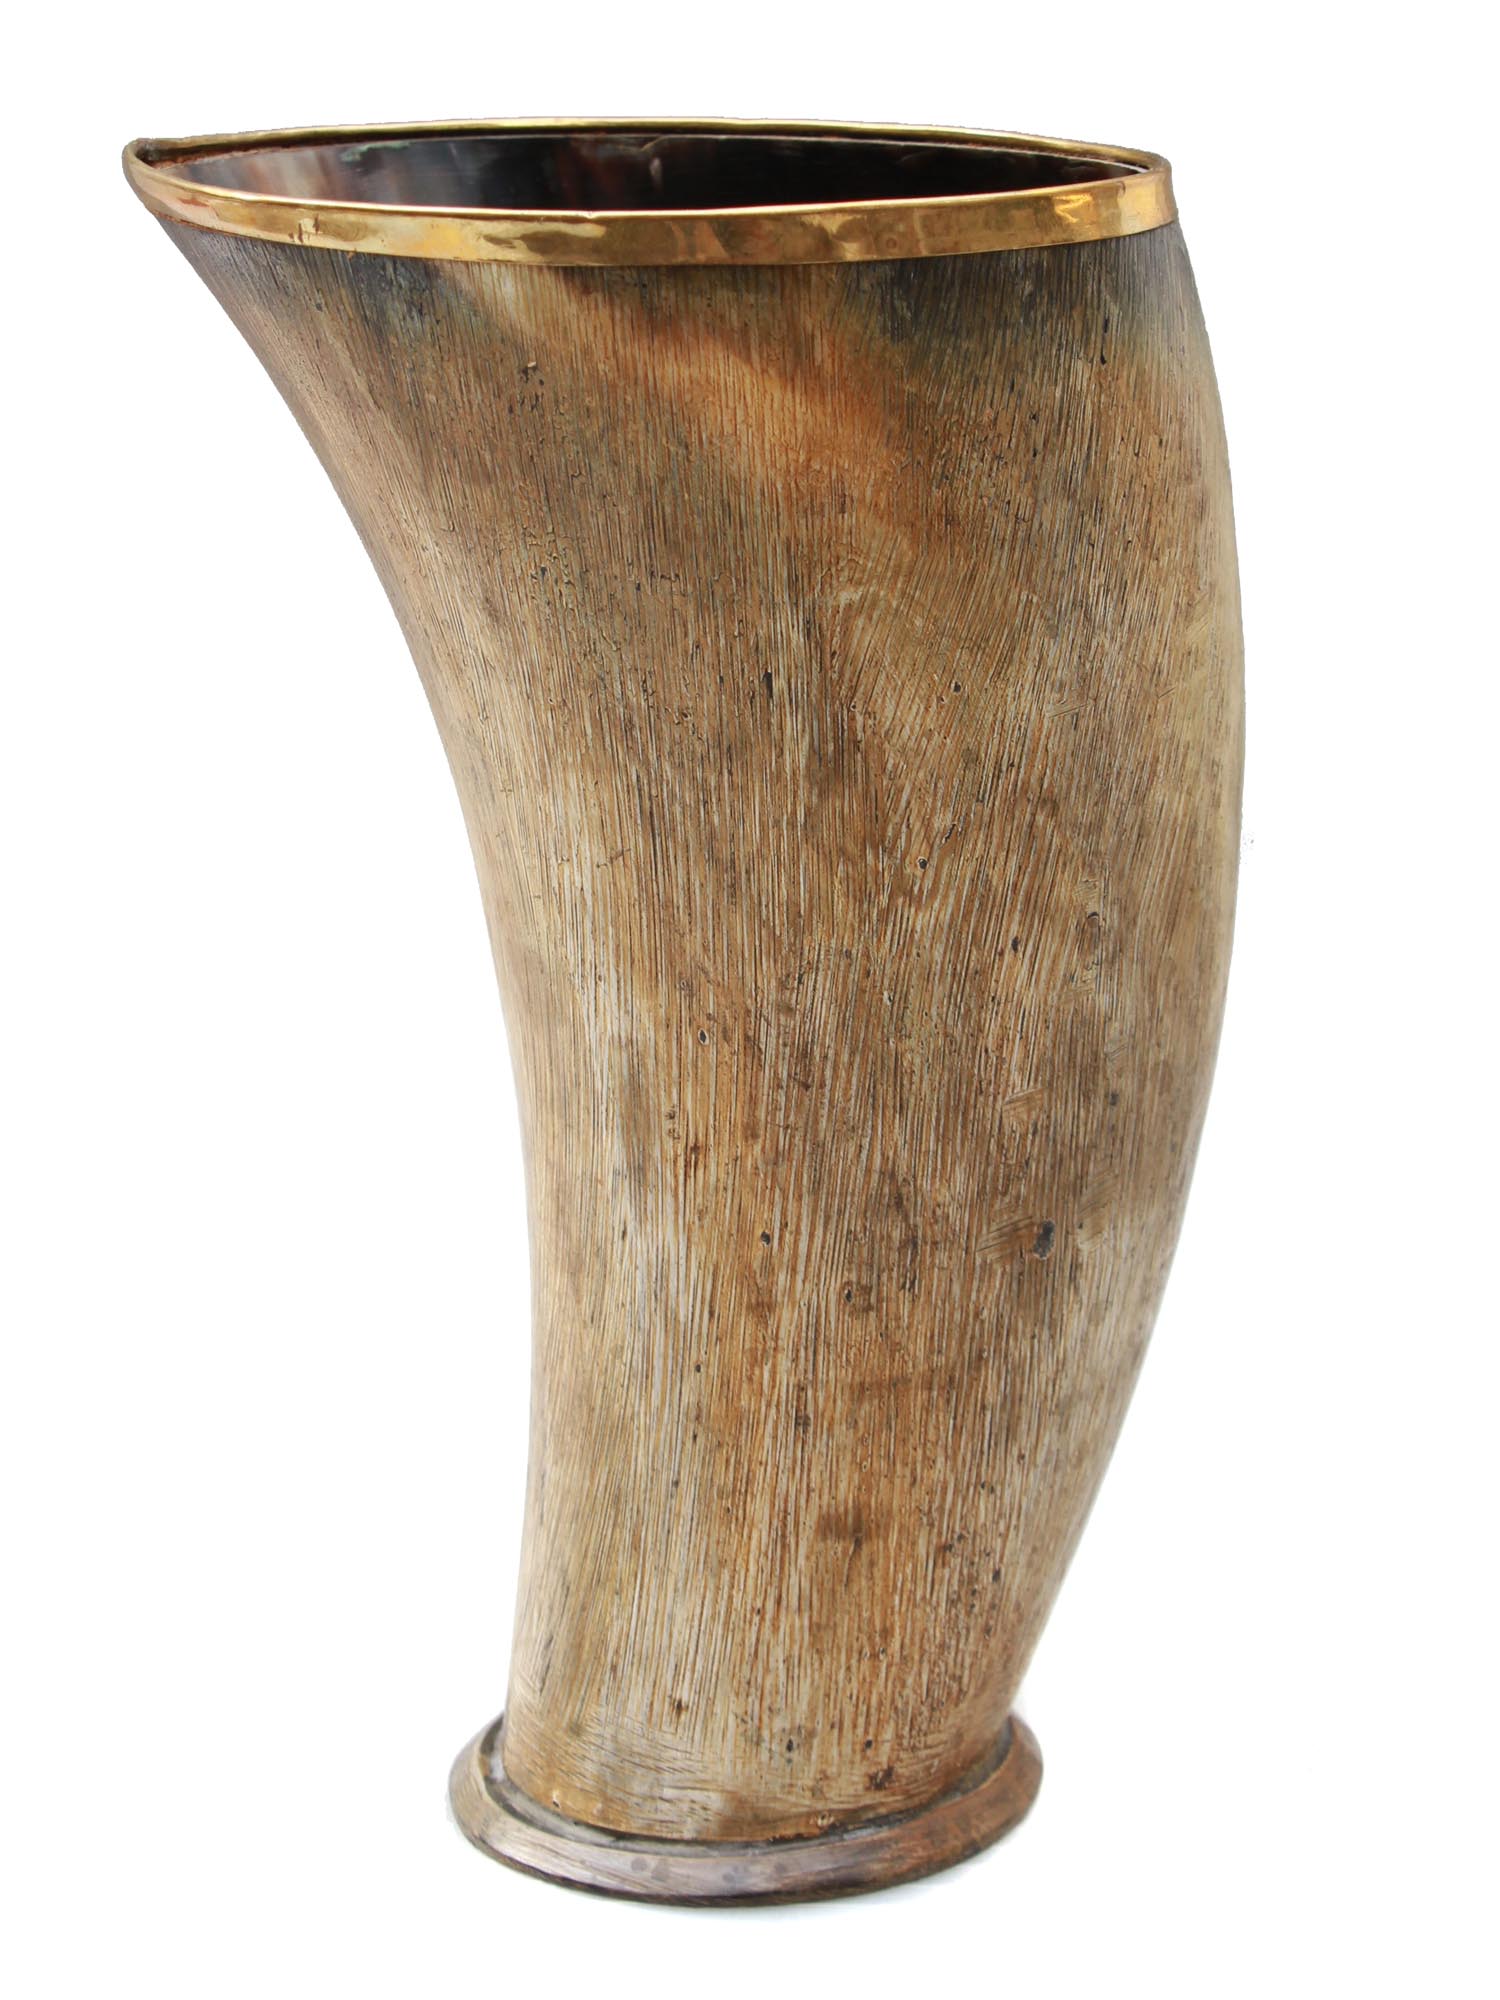 A LARGE ANTIQUE DRINKING CUP MADE OF HORN PIC-0